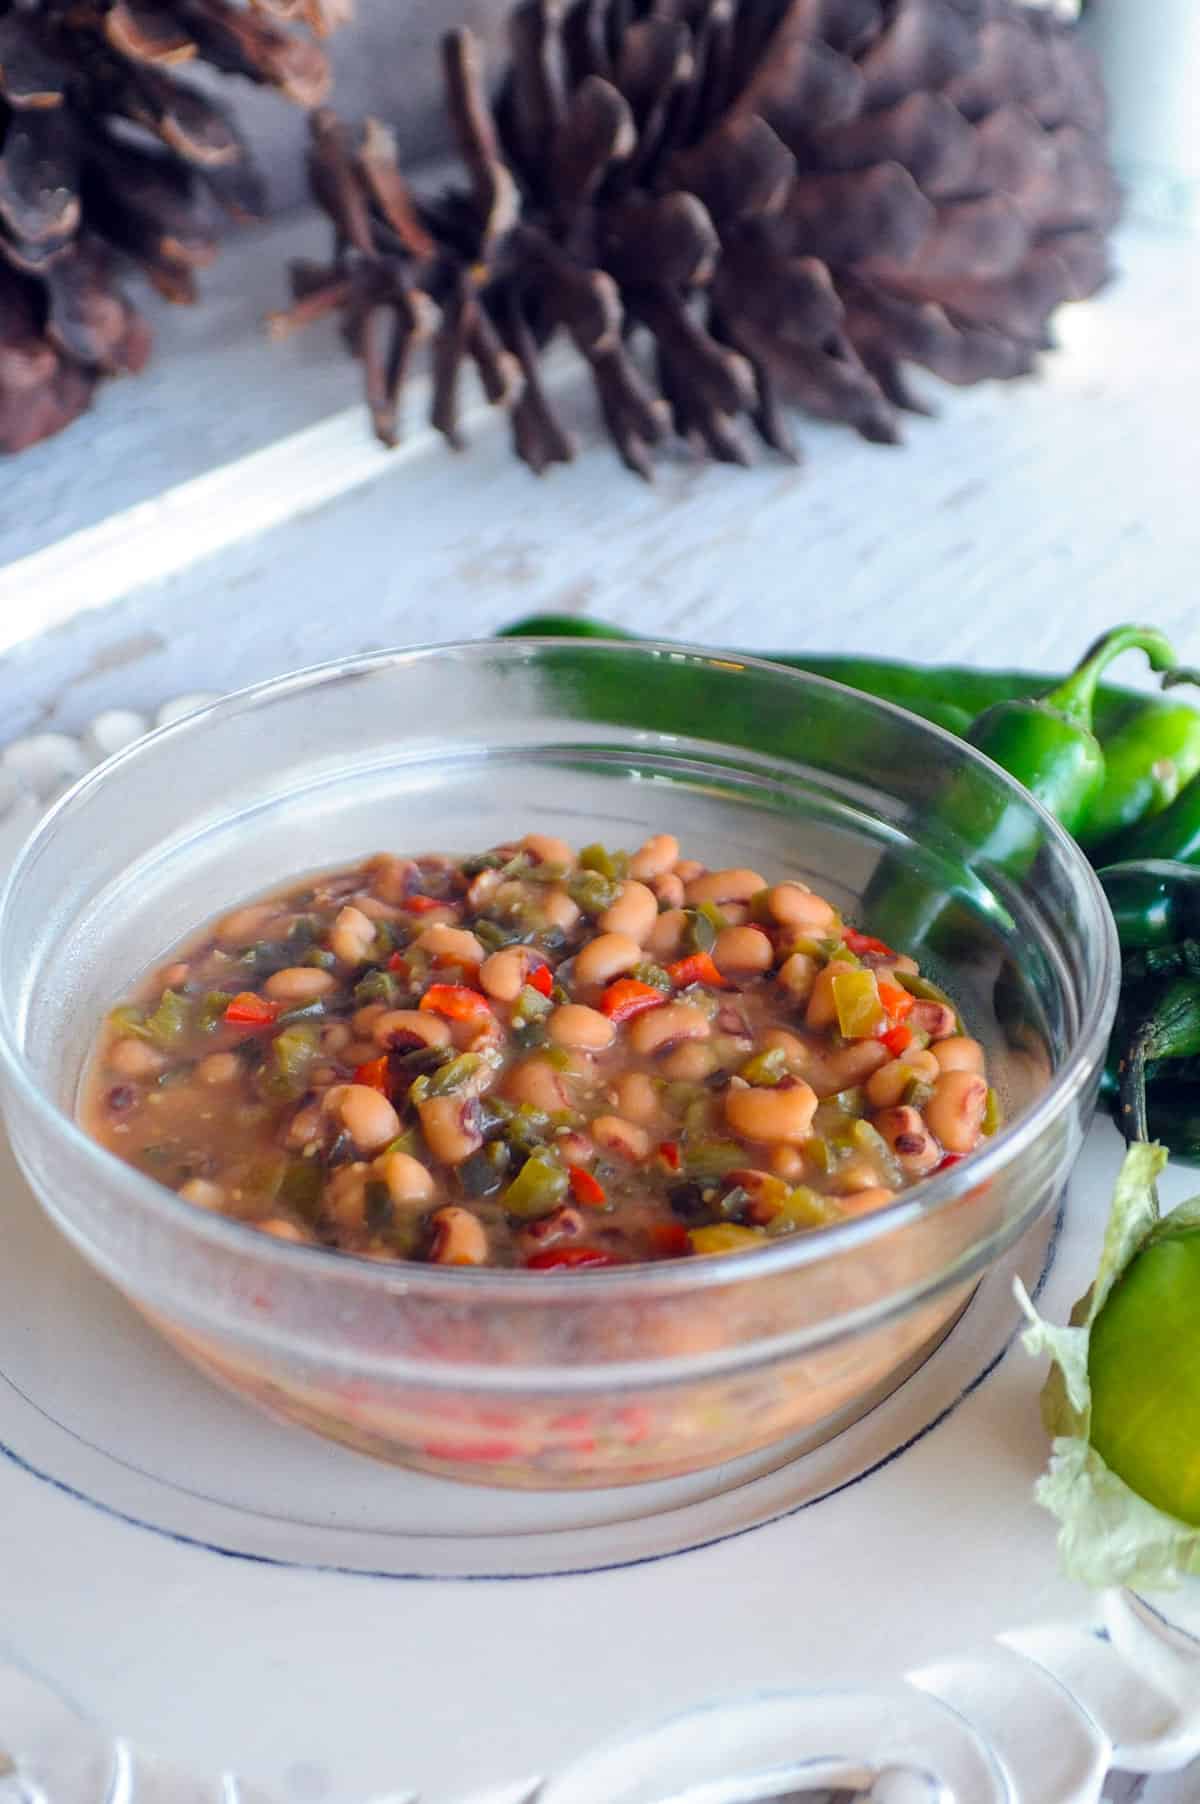 Bowl of Southern Black Eyed Peas with Roasted Peppers.